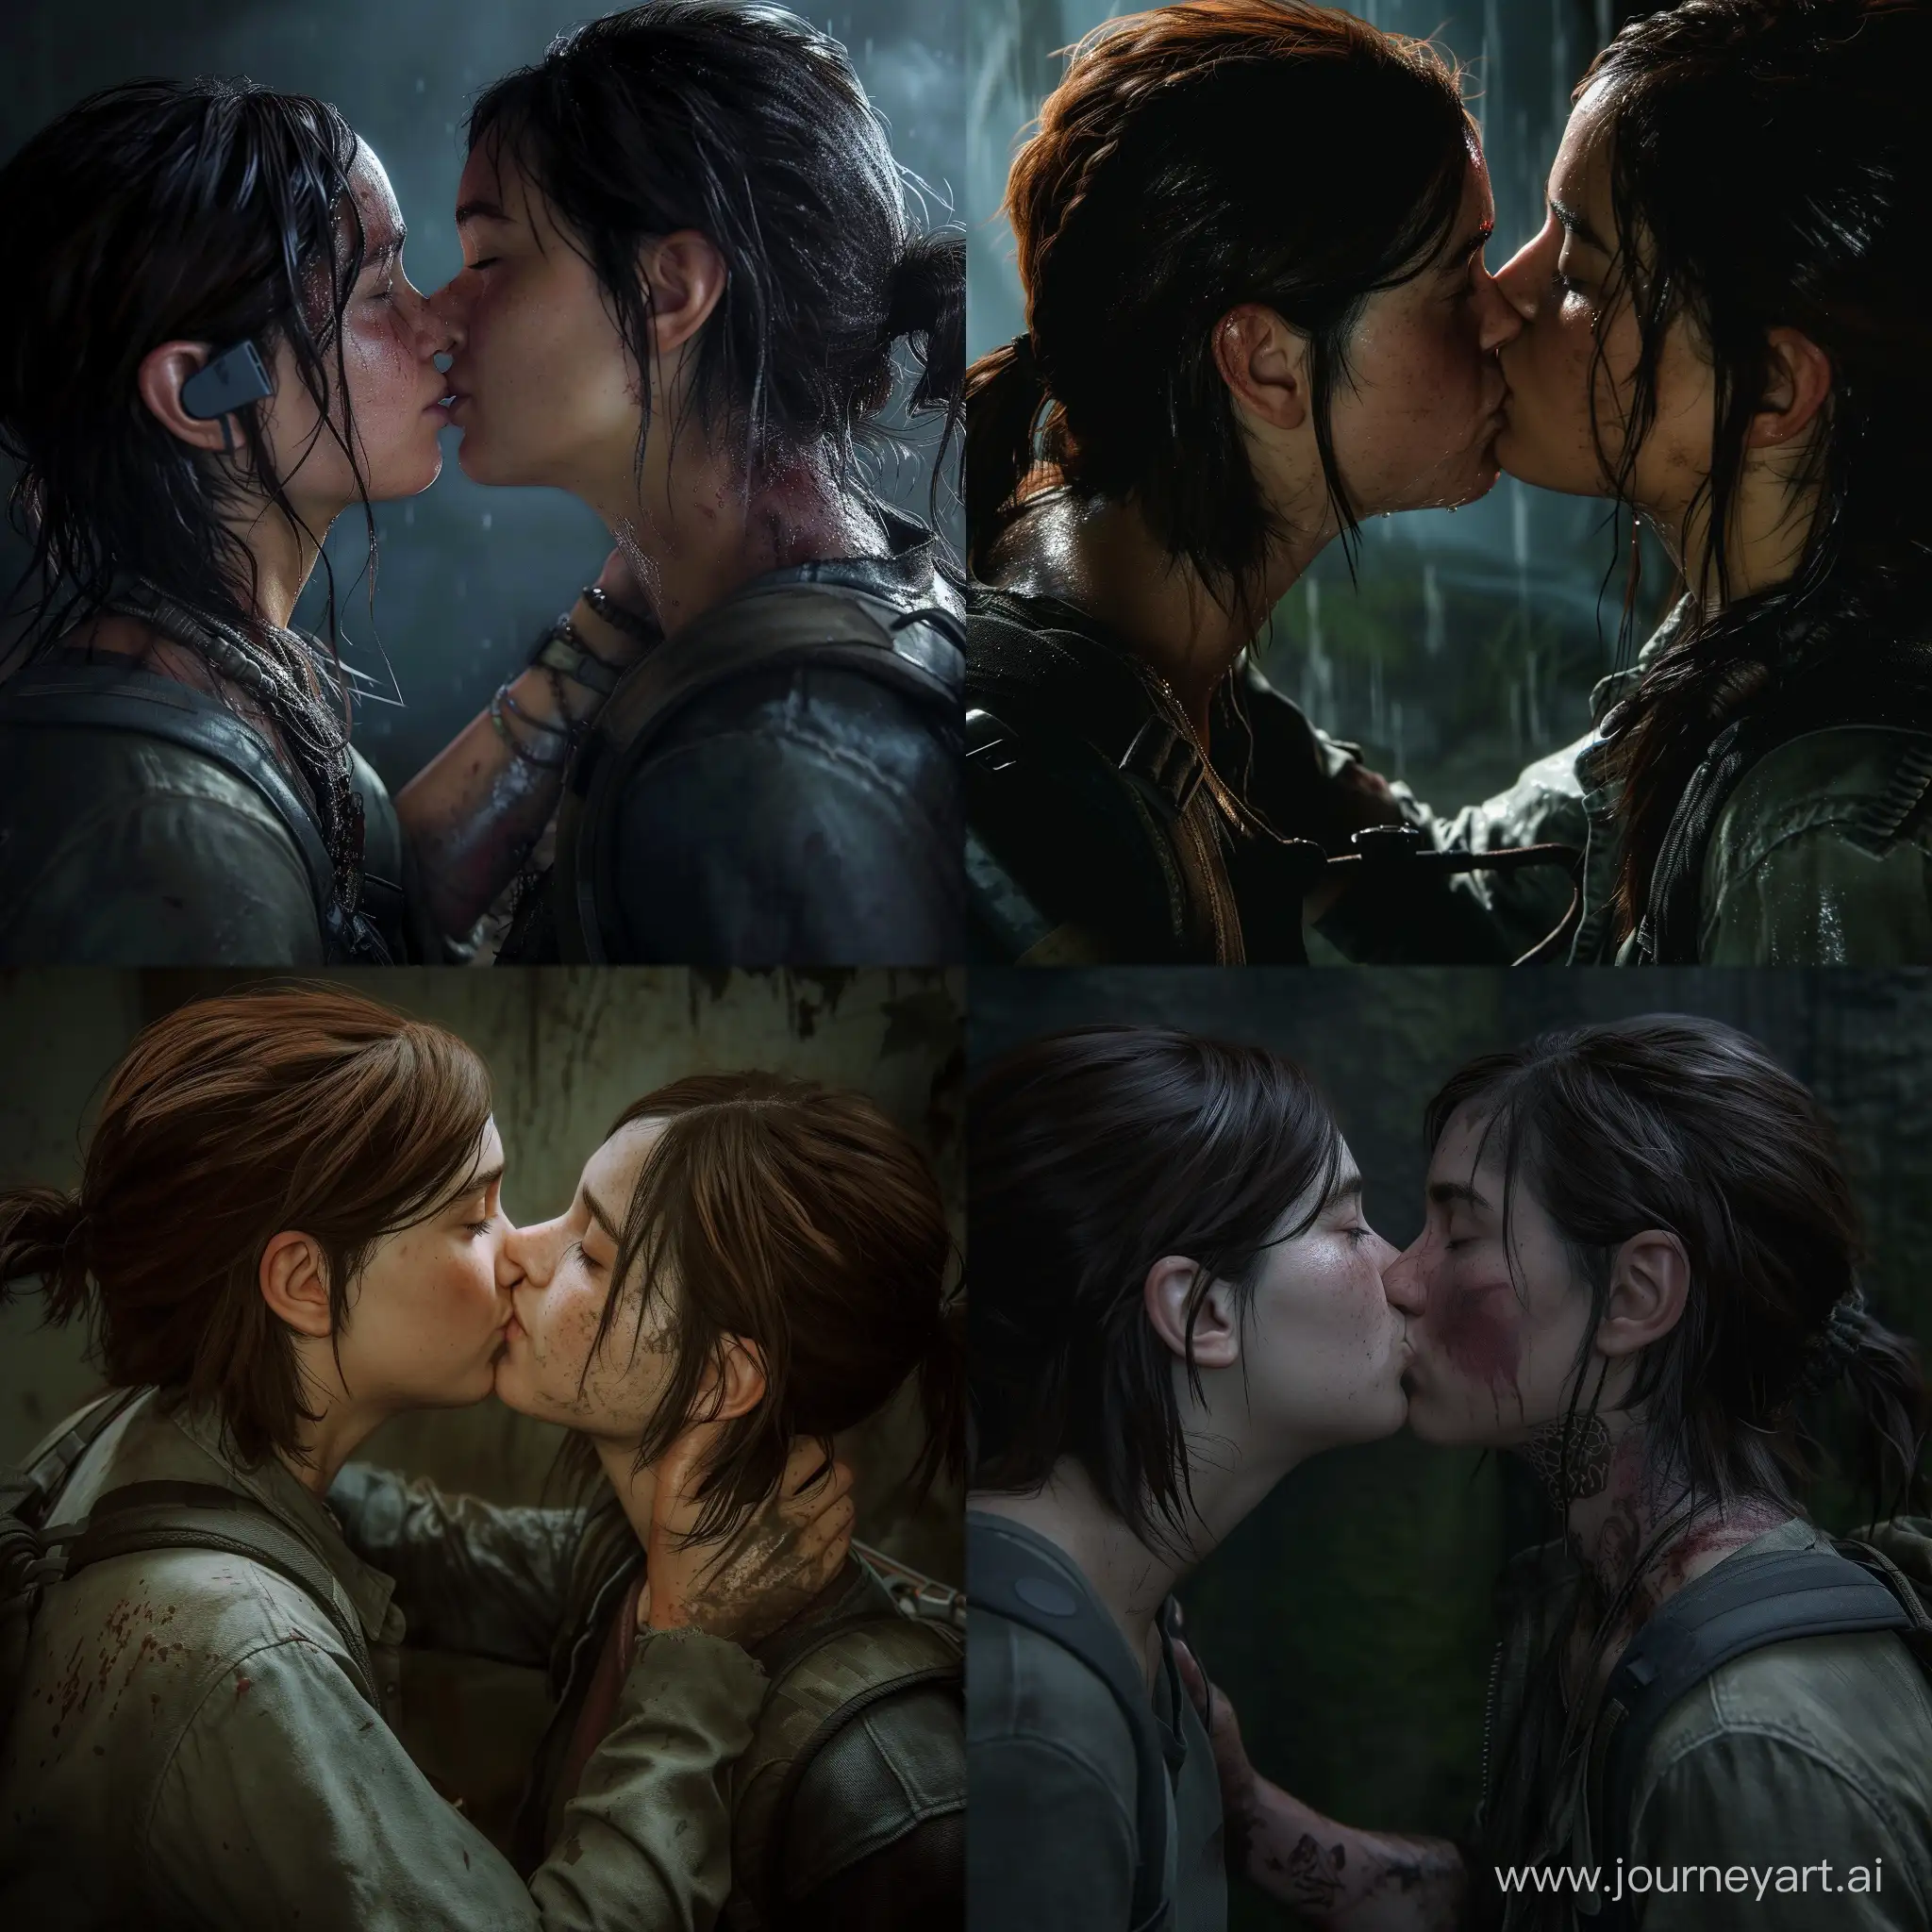 Intimate-Moment-Ellie-Williams-and-Dina-Share-a-Kiss-in-The-Last-Of-Us-2